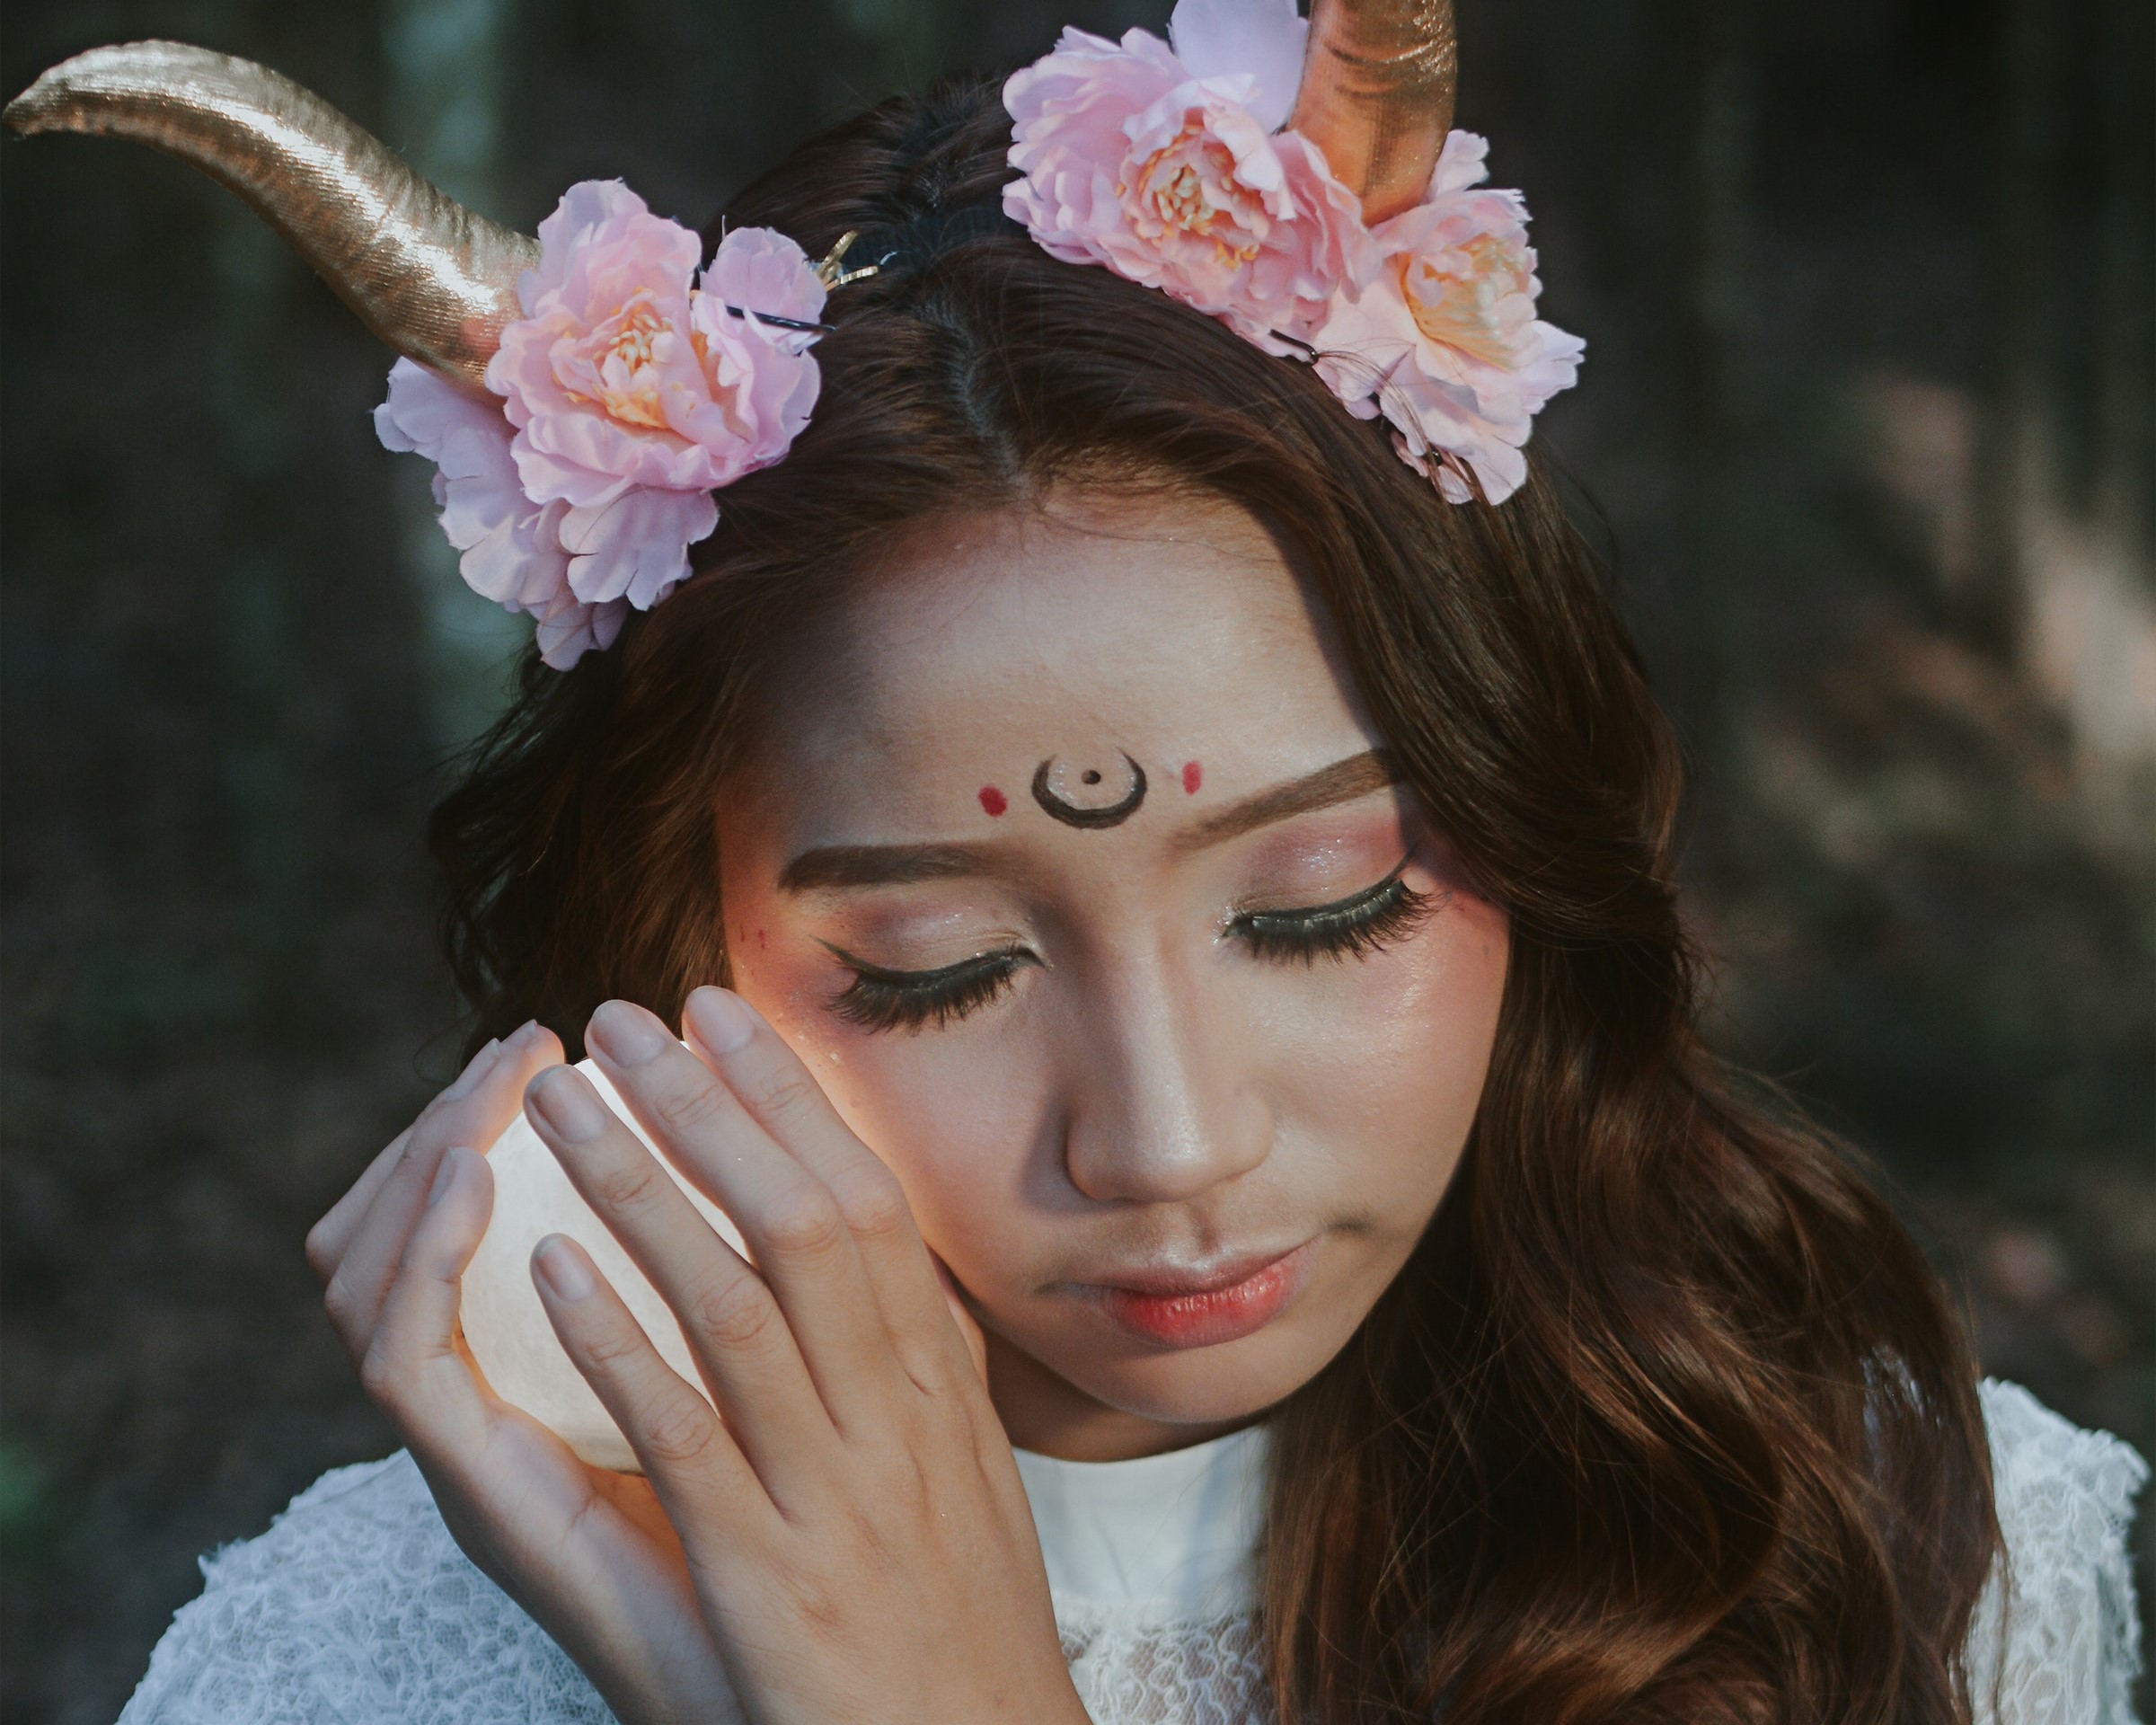 A woman with fake horns and flowers in her hair. | Source: Pexels